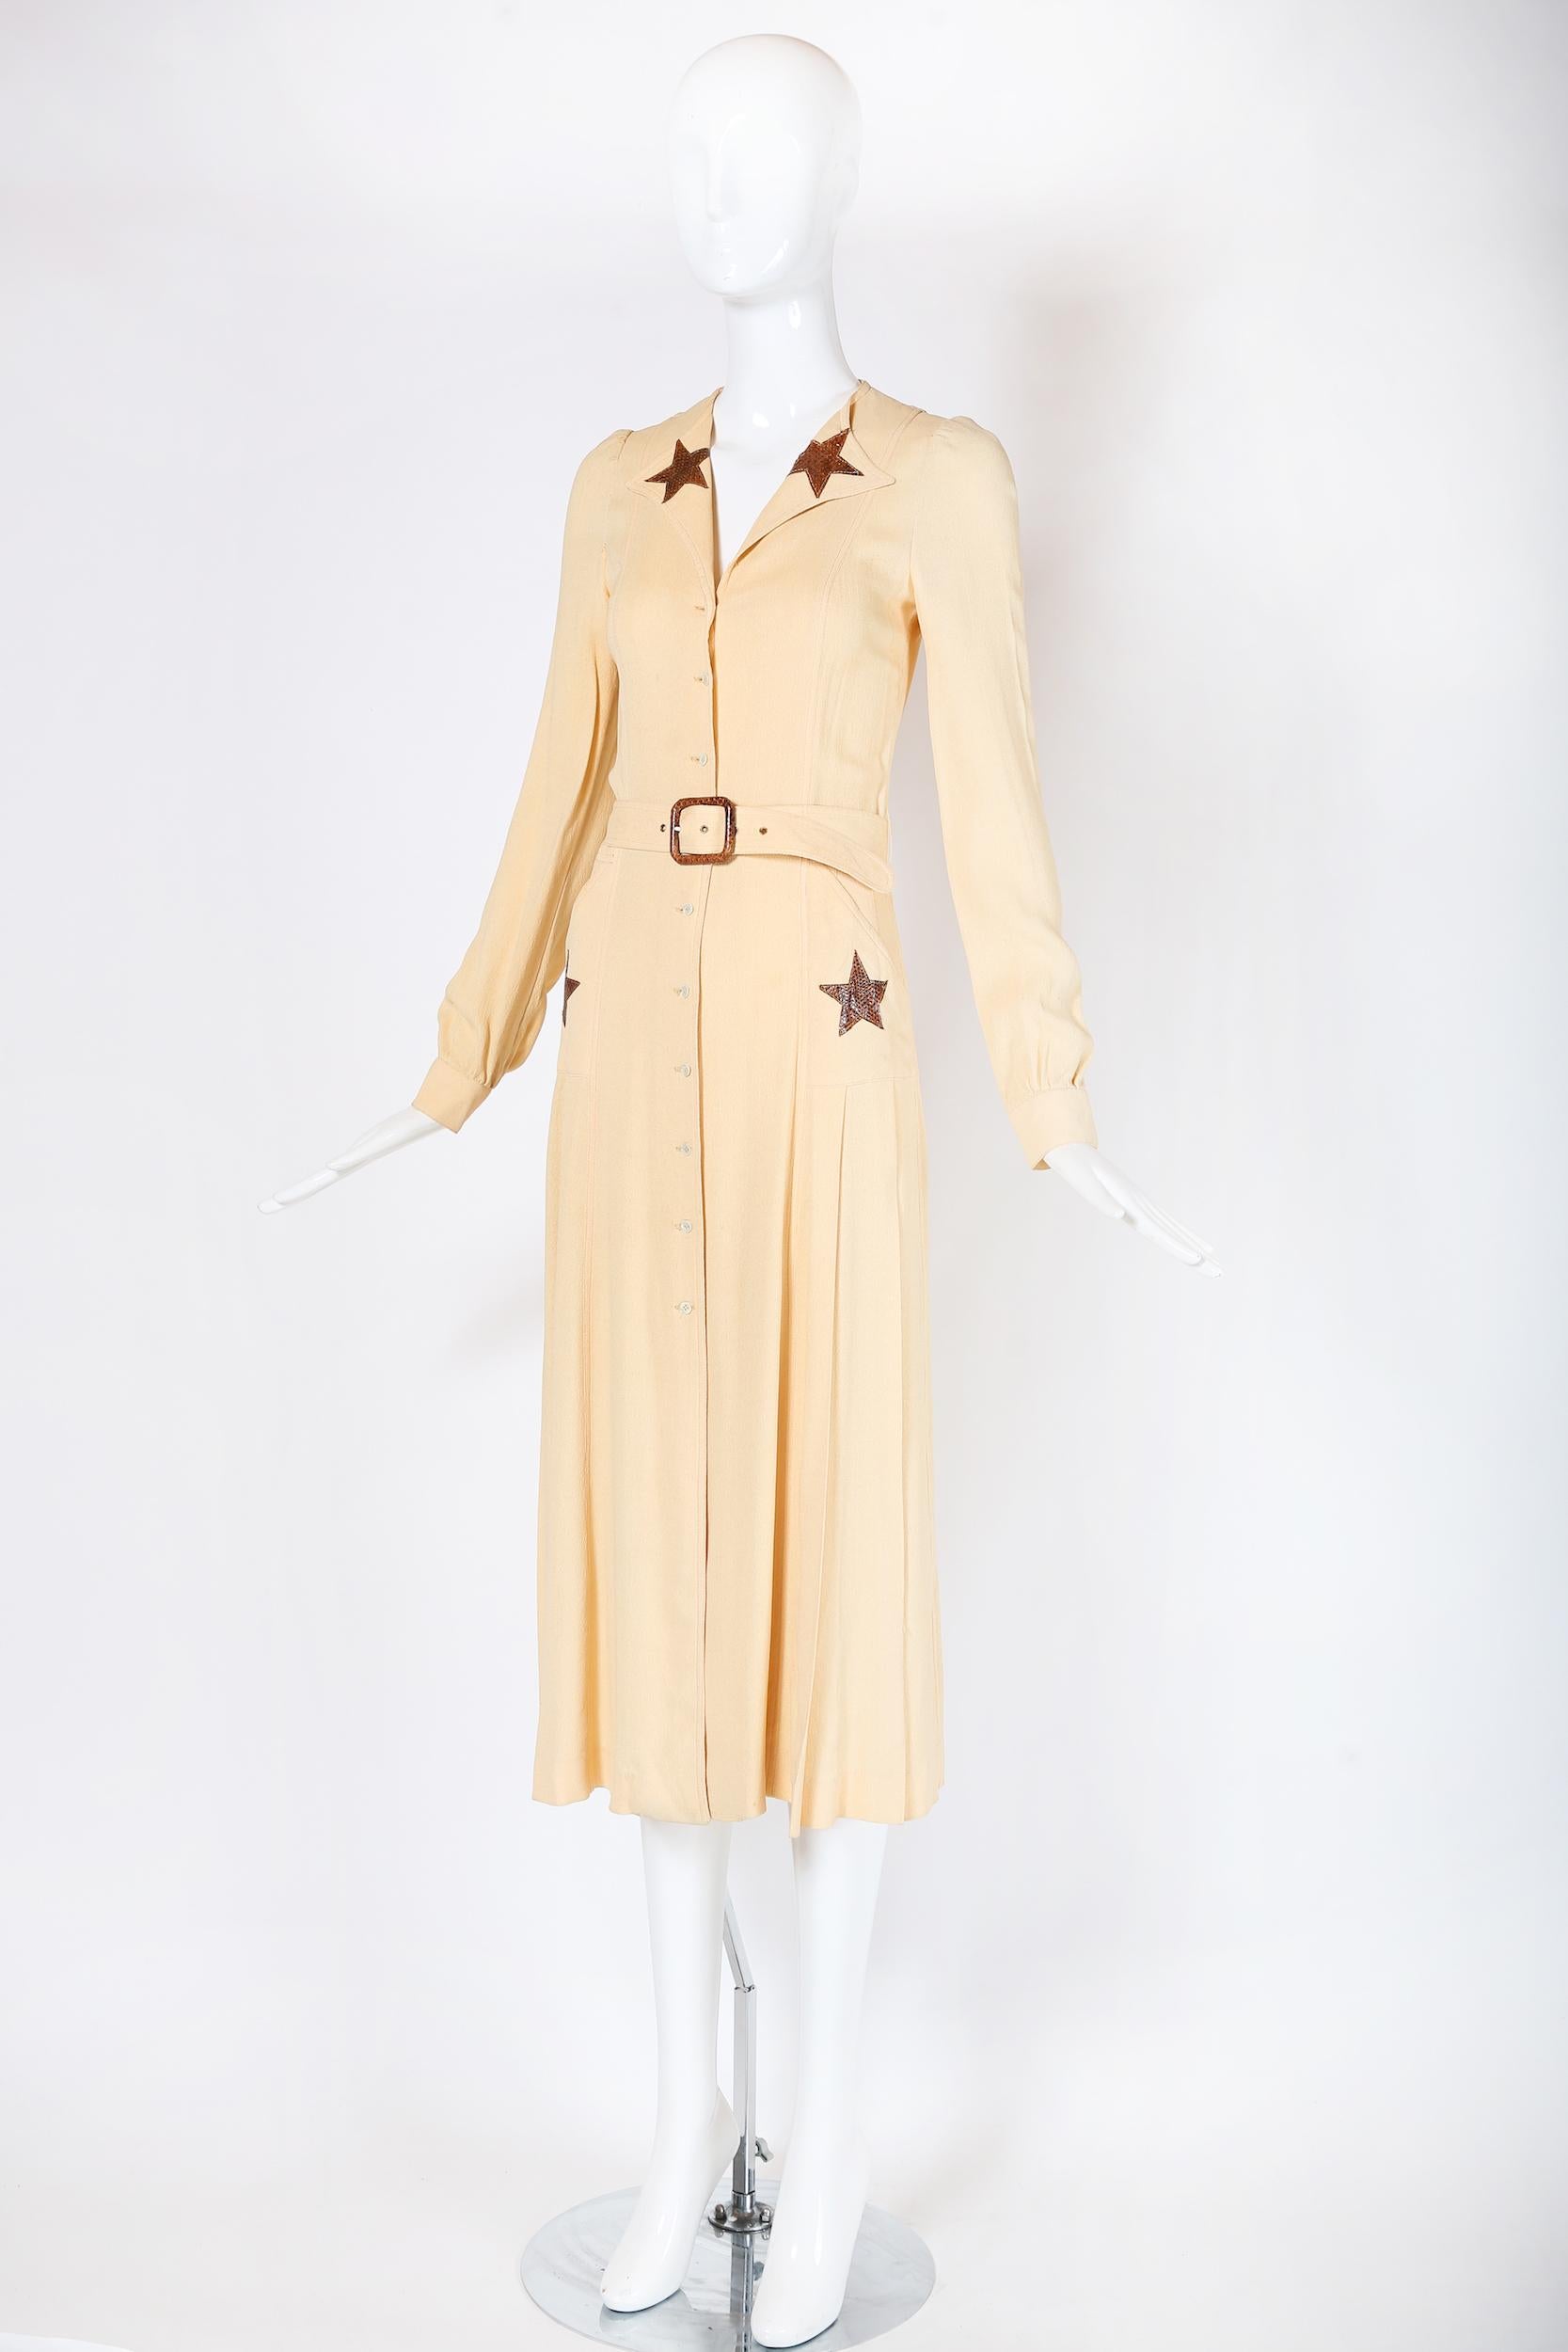 A 1970 pale yellow moss crepe fitted day dress by British designer, MOG that was purchased at Brown's, an upscale London department store. The dress has a box-pleated skirt, side pockets, small pearlescent buttons that fasten down center front, and